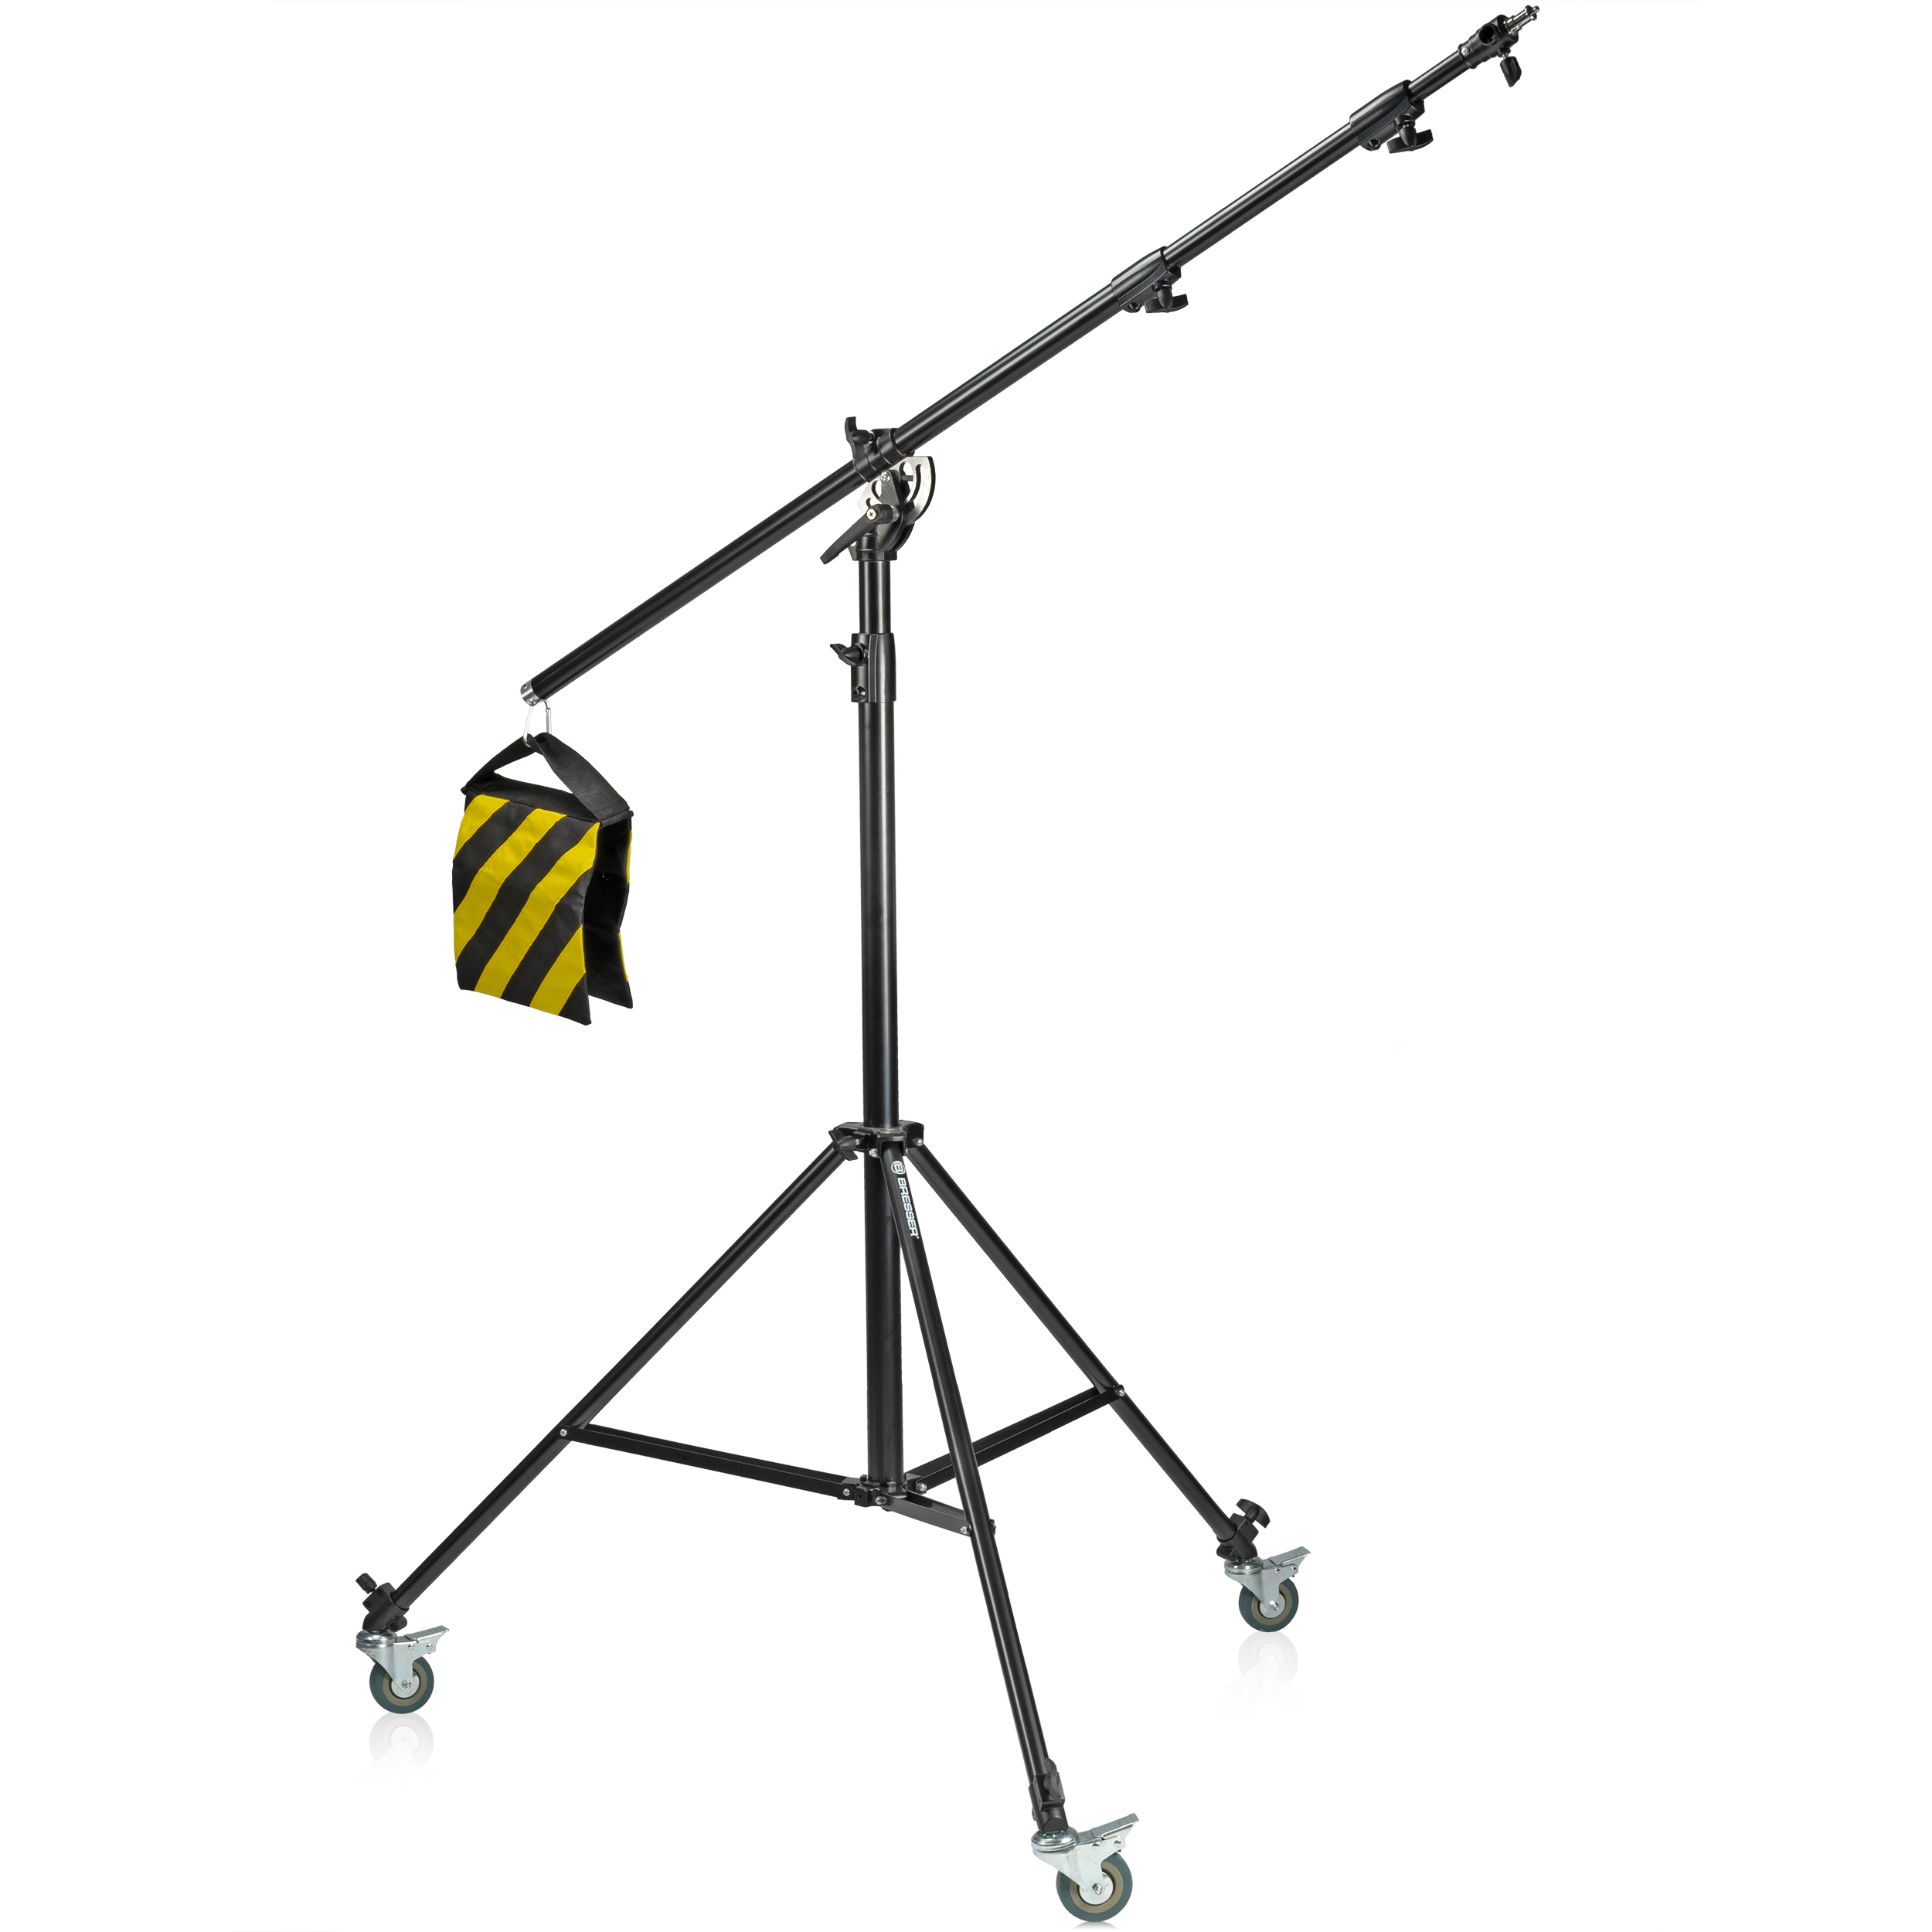 BRESSER BR-LB300 Light Stand with Swivel Arm and Wheels